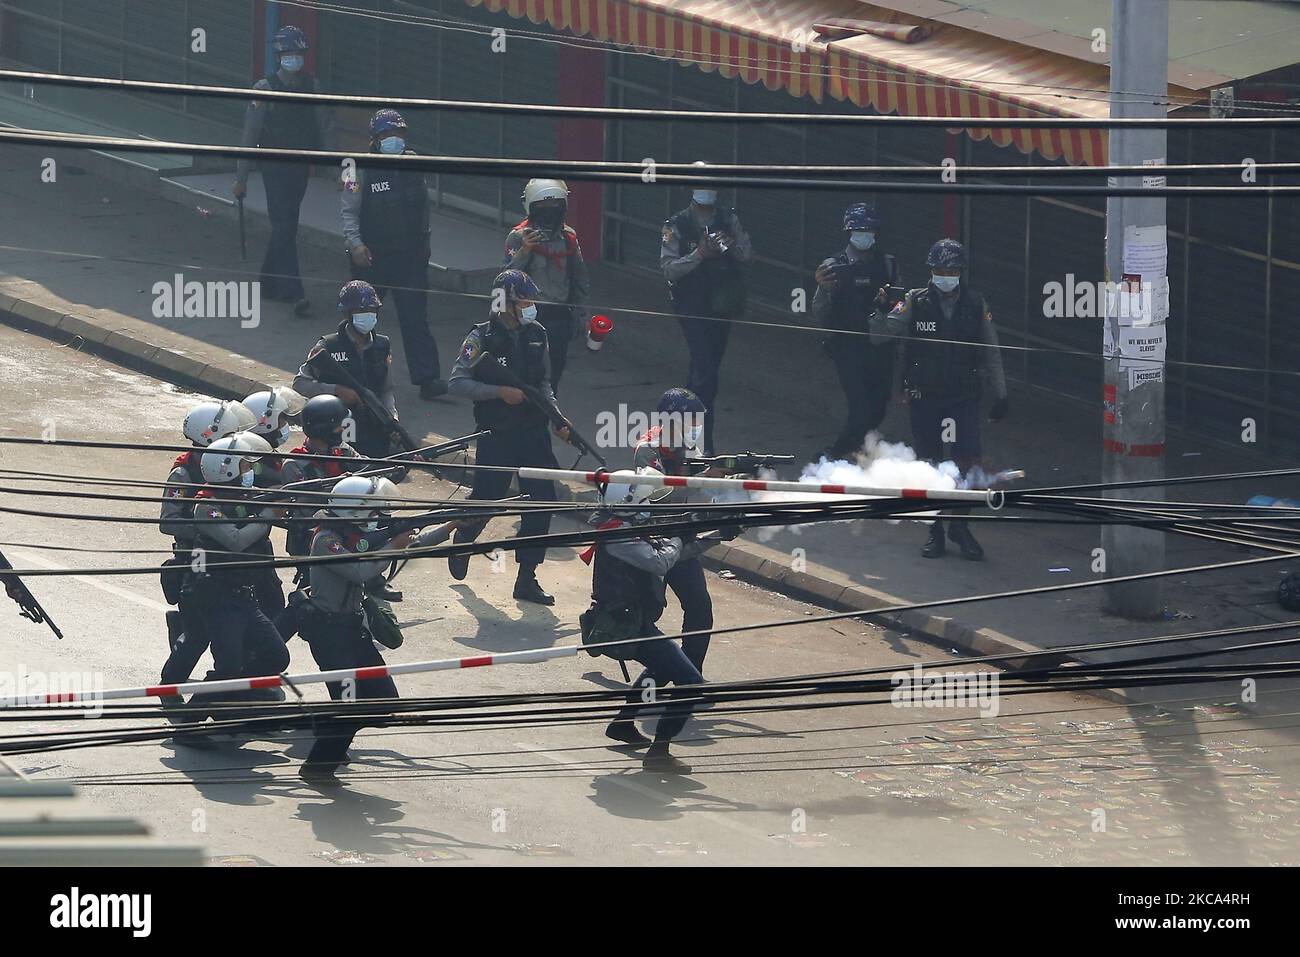 Riot police fire tear gas at protesters during a violent crackdown on demonstrations against the military coup in Yangon, Myanmar on February 28, 2021. (Photo by Myat Thu Kyaw/NurPhoto) Stock Photo